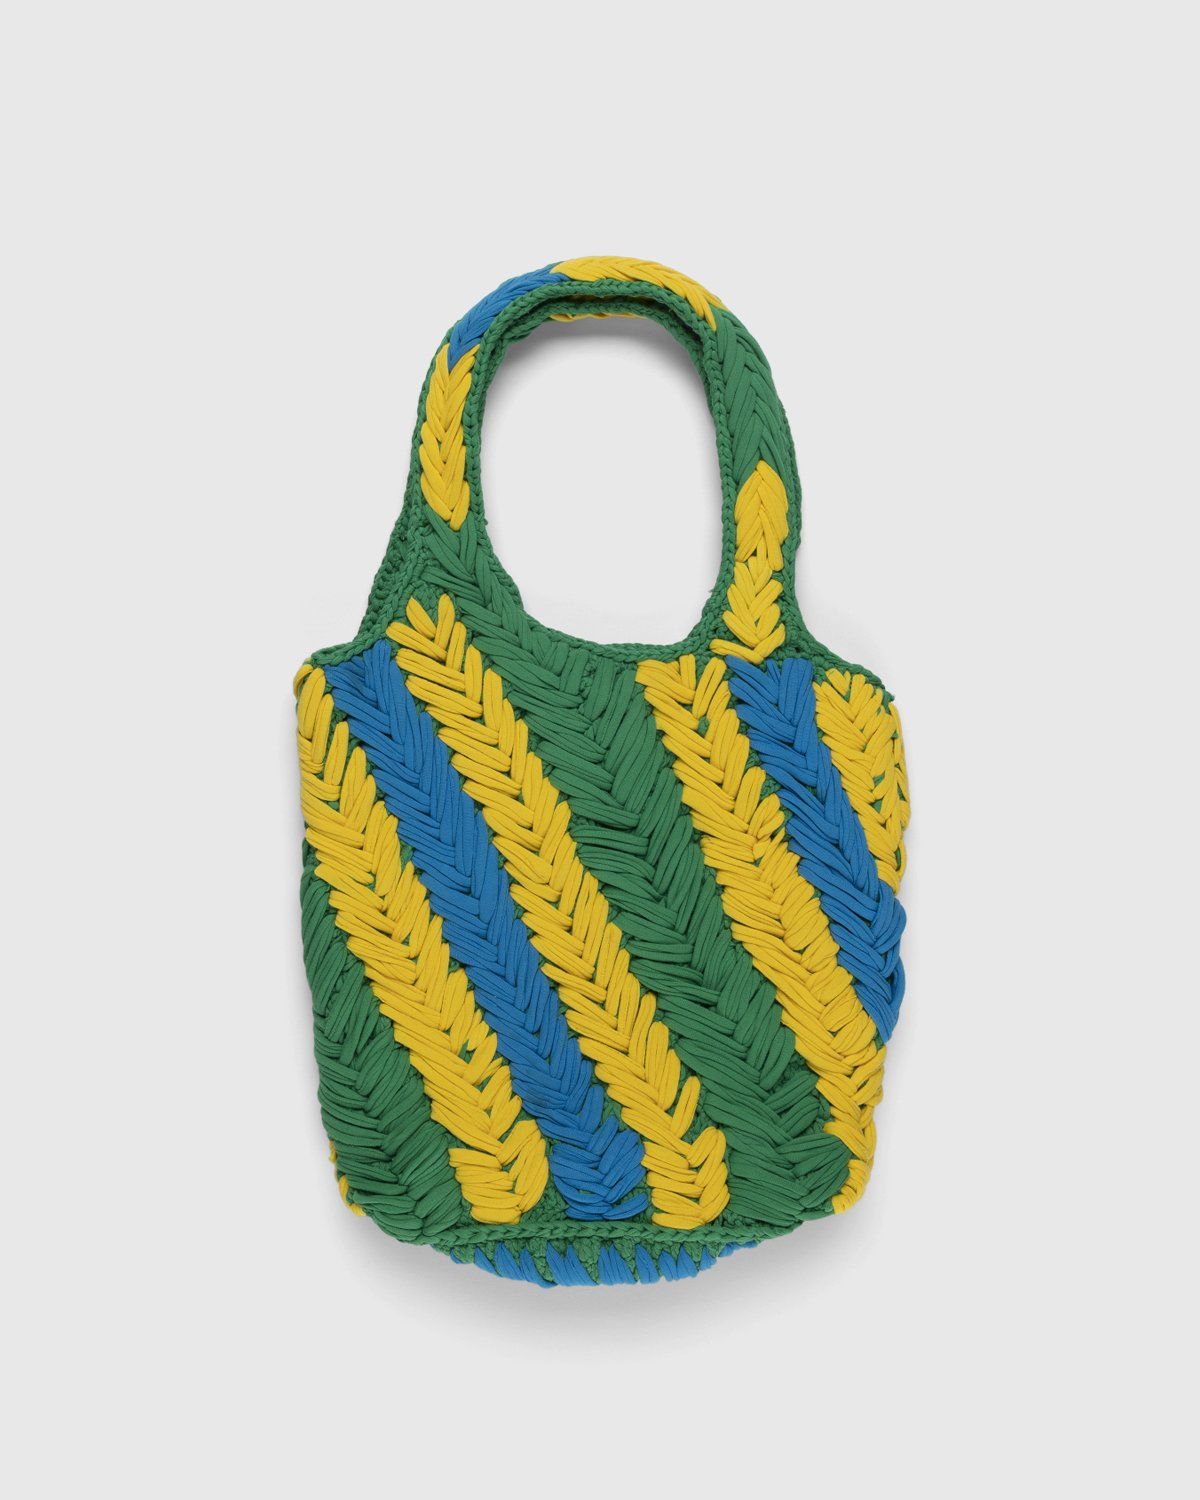 J.W. Anderson – Knitted Shopper Green/Yellow/Blue - Bags - Multi - Image 2